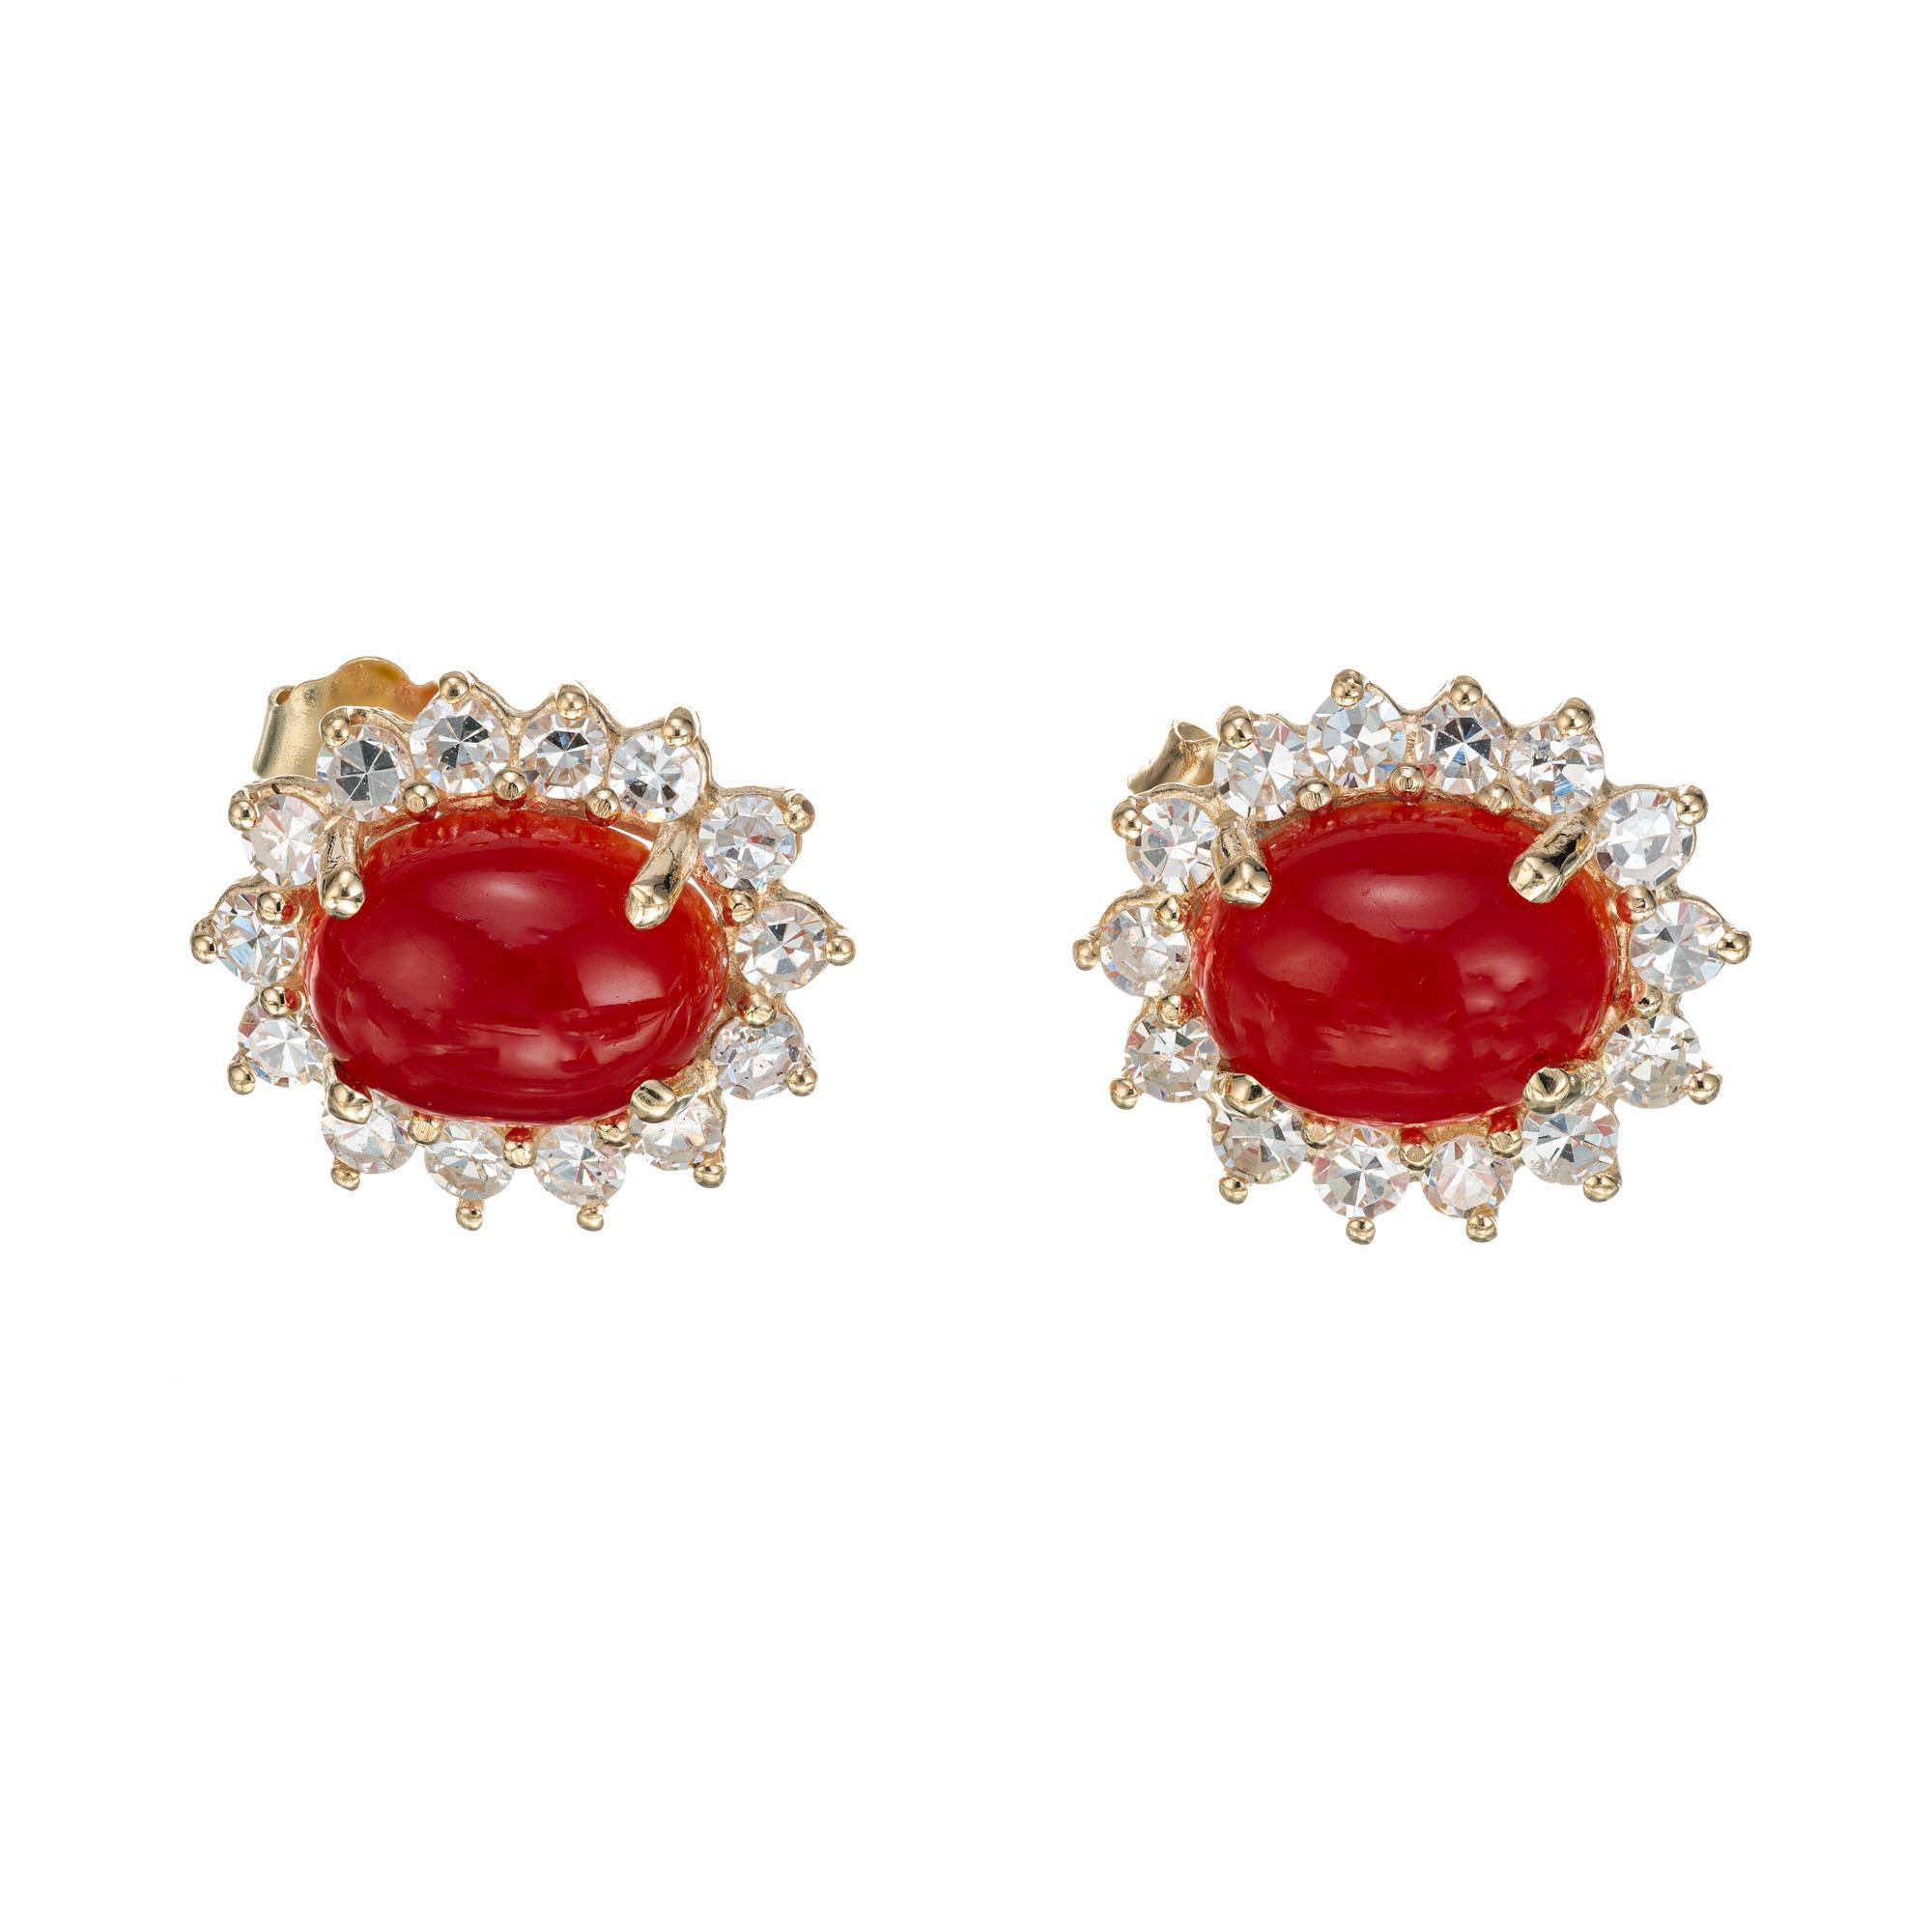 Natural red orange coral and diamond earrings set in 14k yellow gold. Two GIA Certified natural 9x7 red orange coral cabochons, each with a halo of single cut diamonds. 

2 oval cabochon orange red coral, approx. 3.25cts GIA certificate#